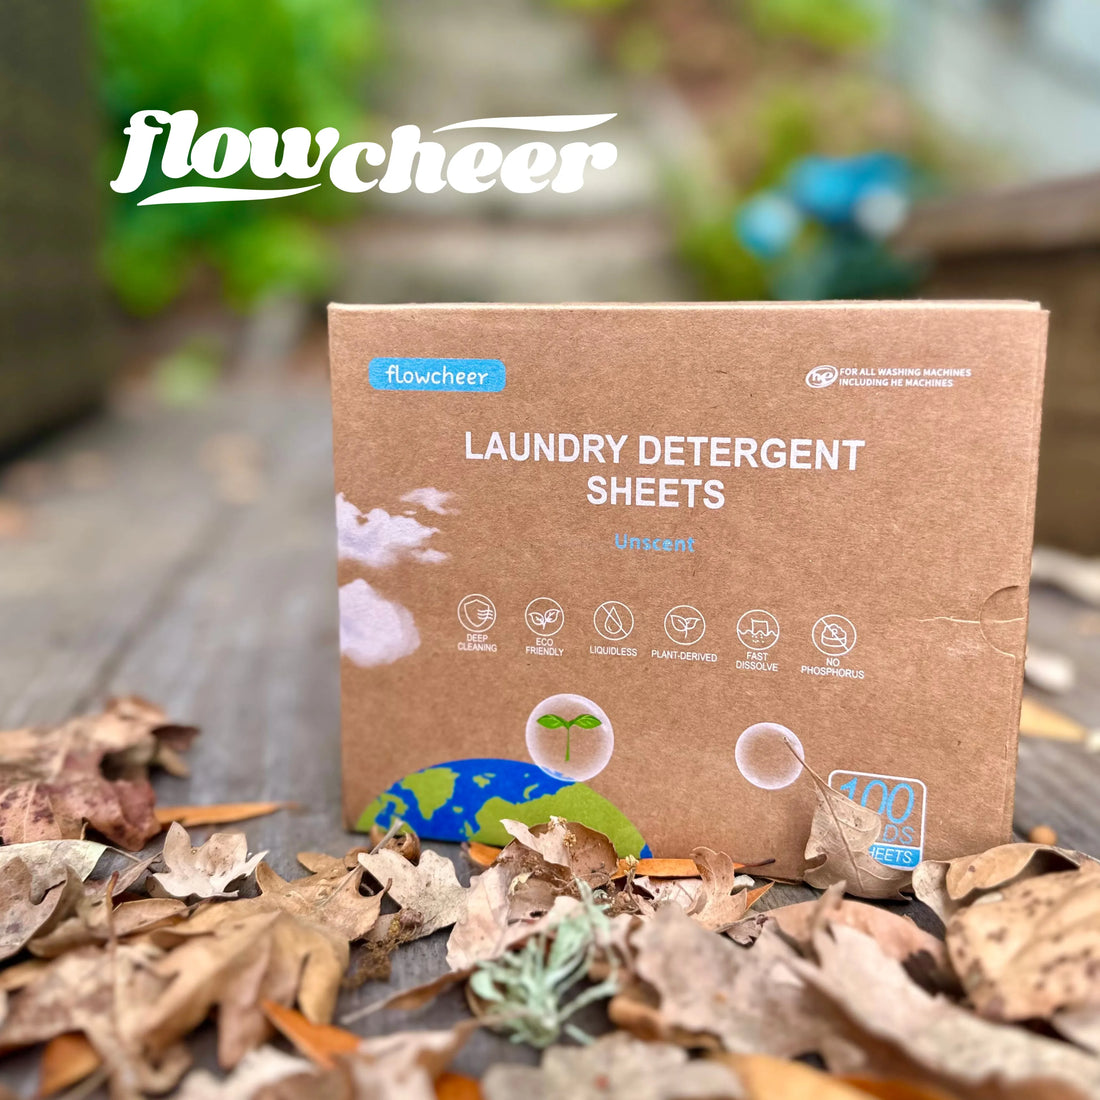 The Benefits of Using Laundry Detergent Sheets for a Sustainable Laundry Routine - Flowcheer